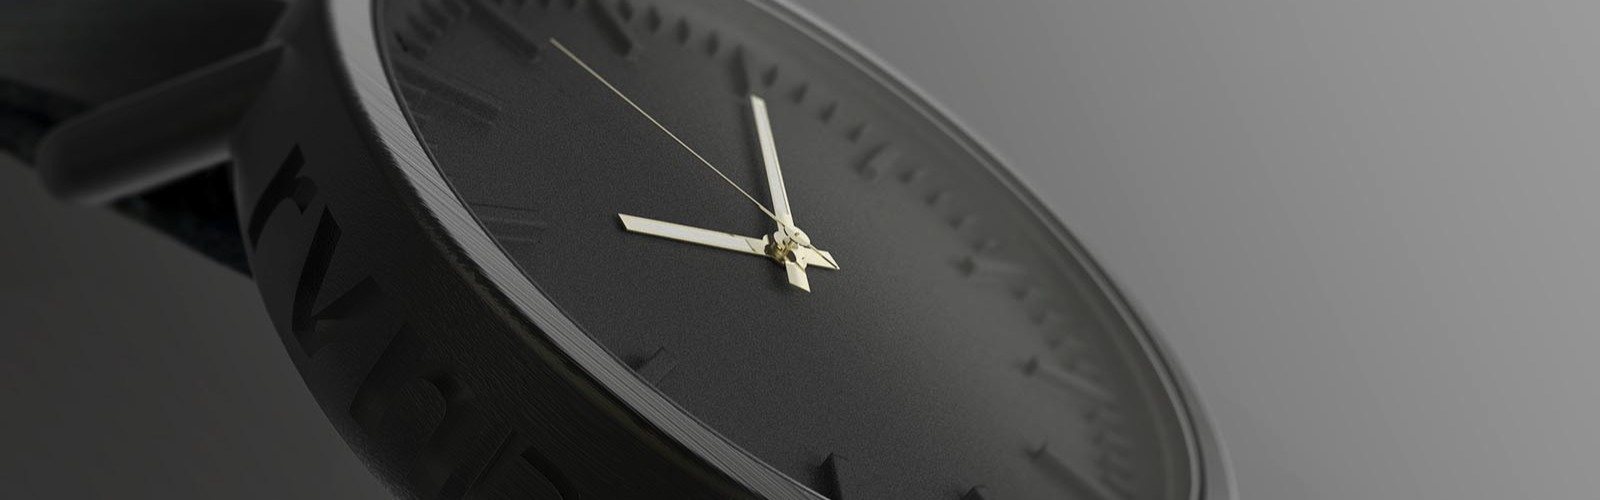 3D Printed Watches1